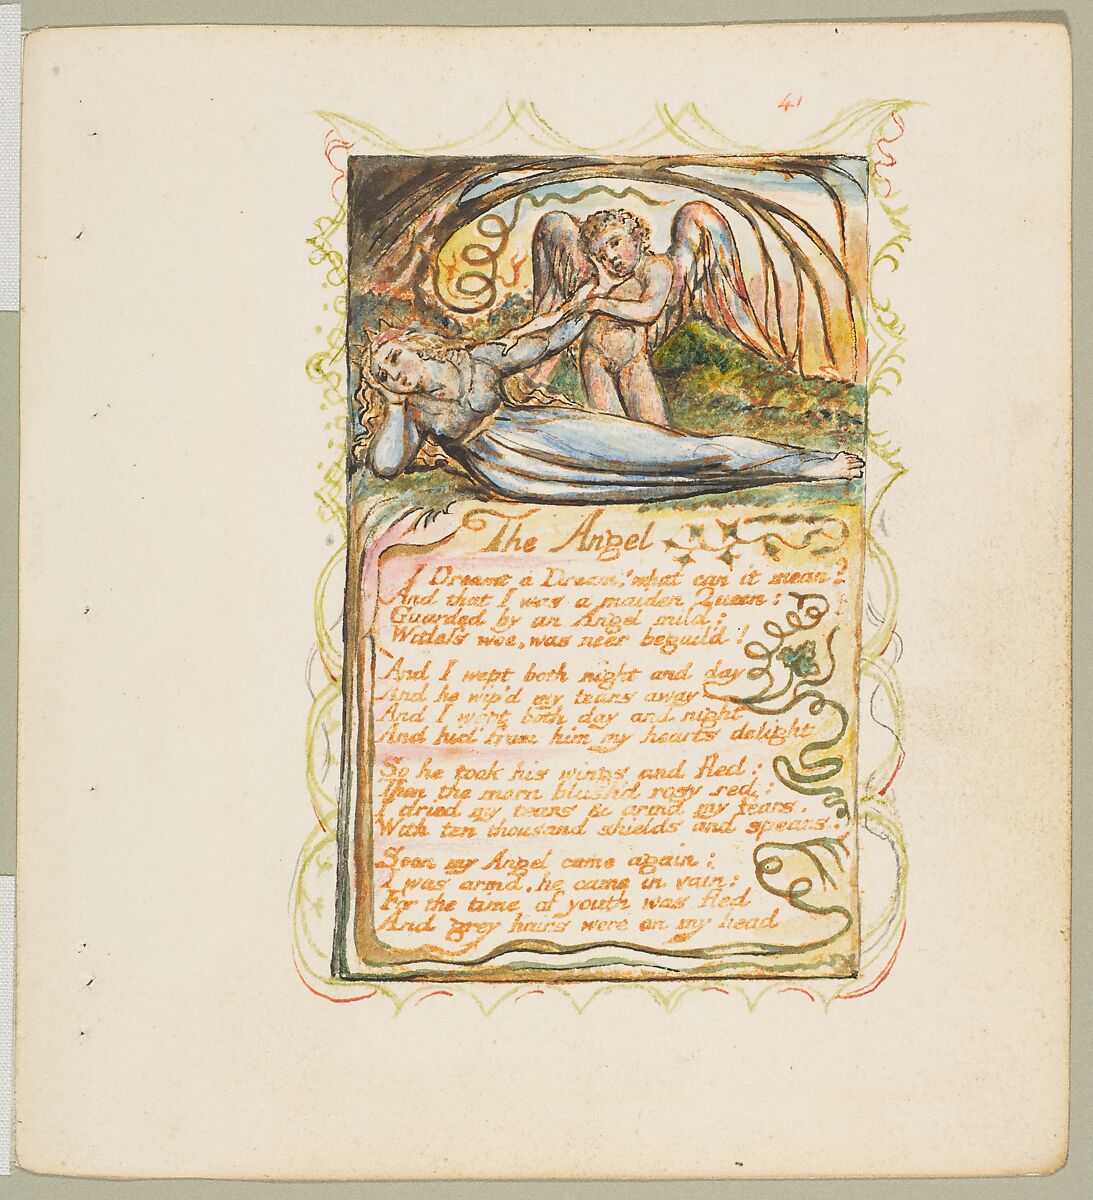 Songs of Experience: The Angel, William Blake, Relief etching printed in orange-brown ink and hand-colored with watercolor and shell gold